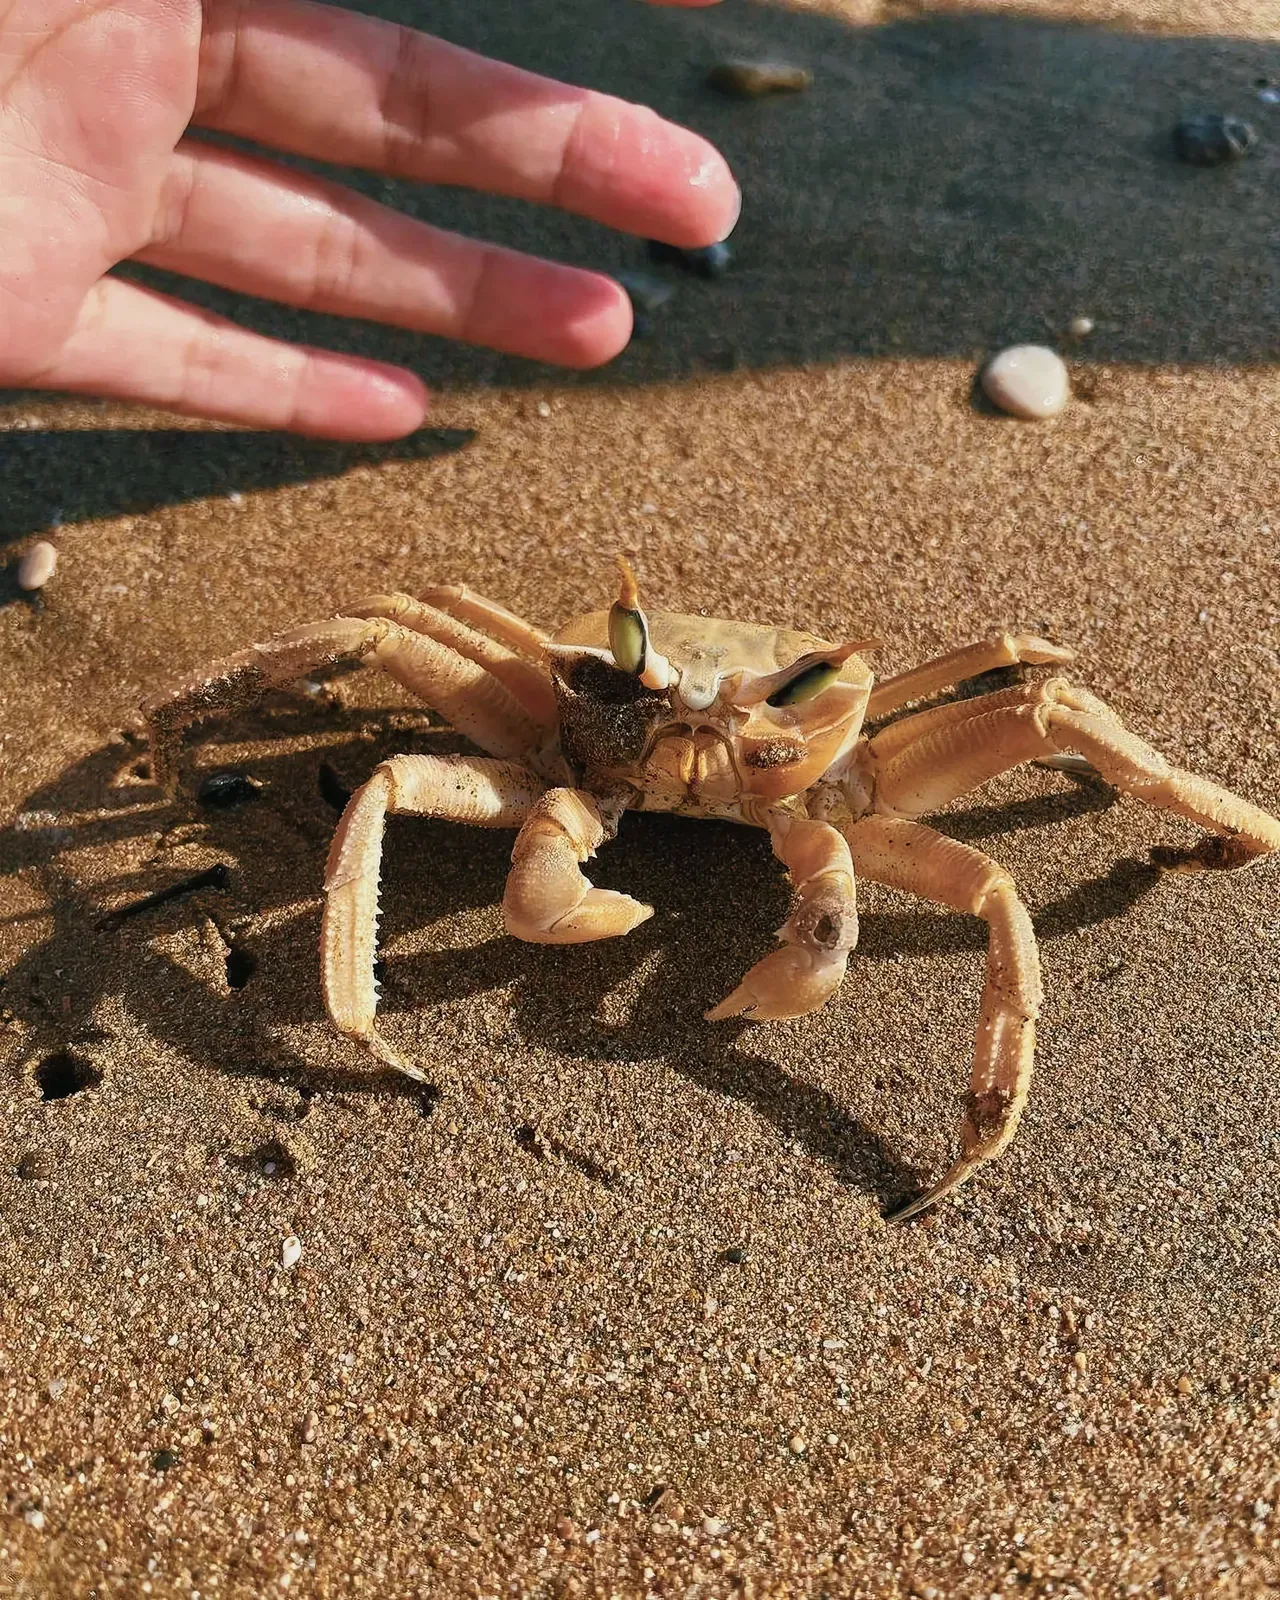 A crab resting on a sandy beach in Iskele, Northern Cyprus.